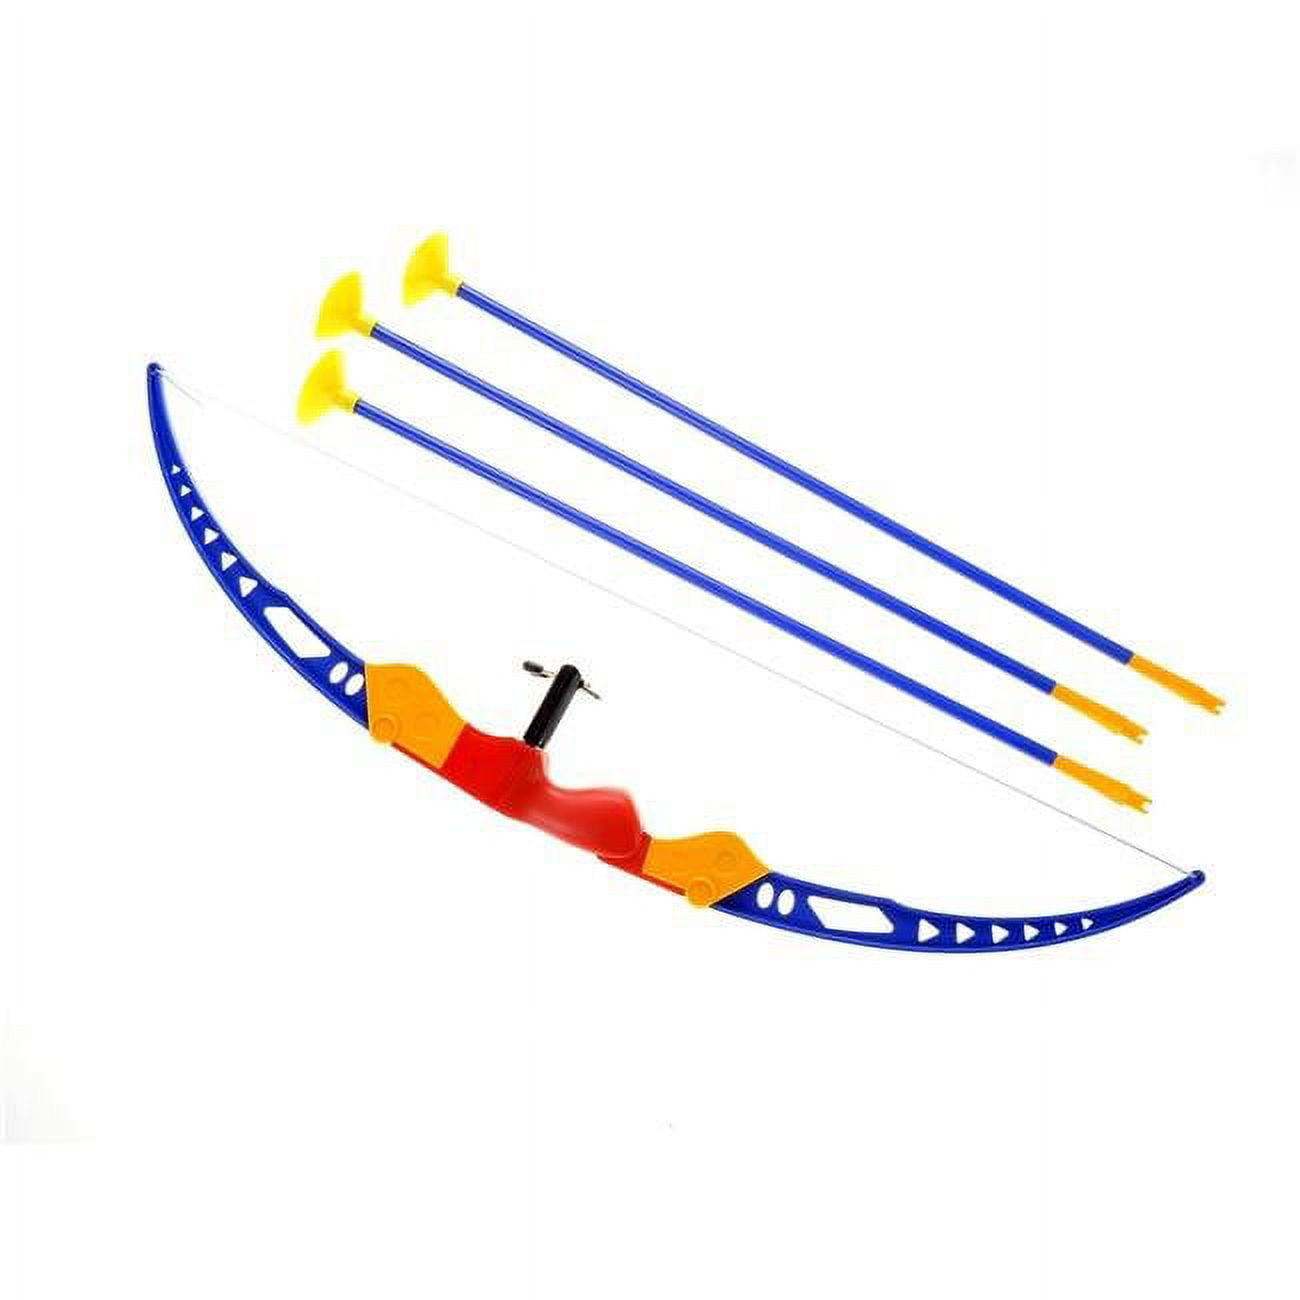 Ps511 Sport Super Toy Bow & Arrow Dart Playset With Suction Dart Arrows